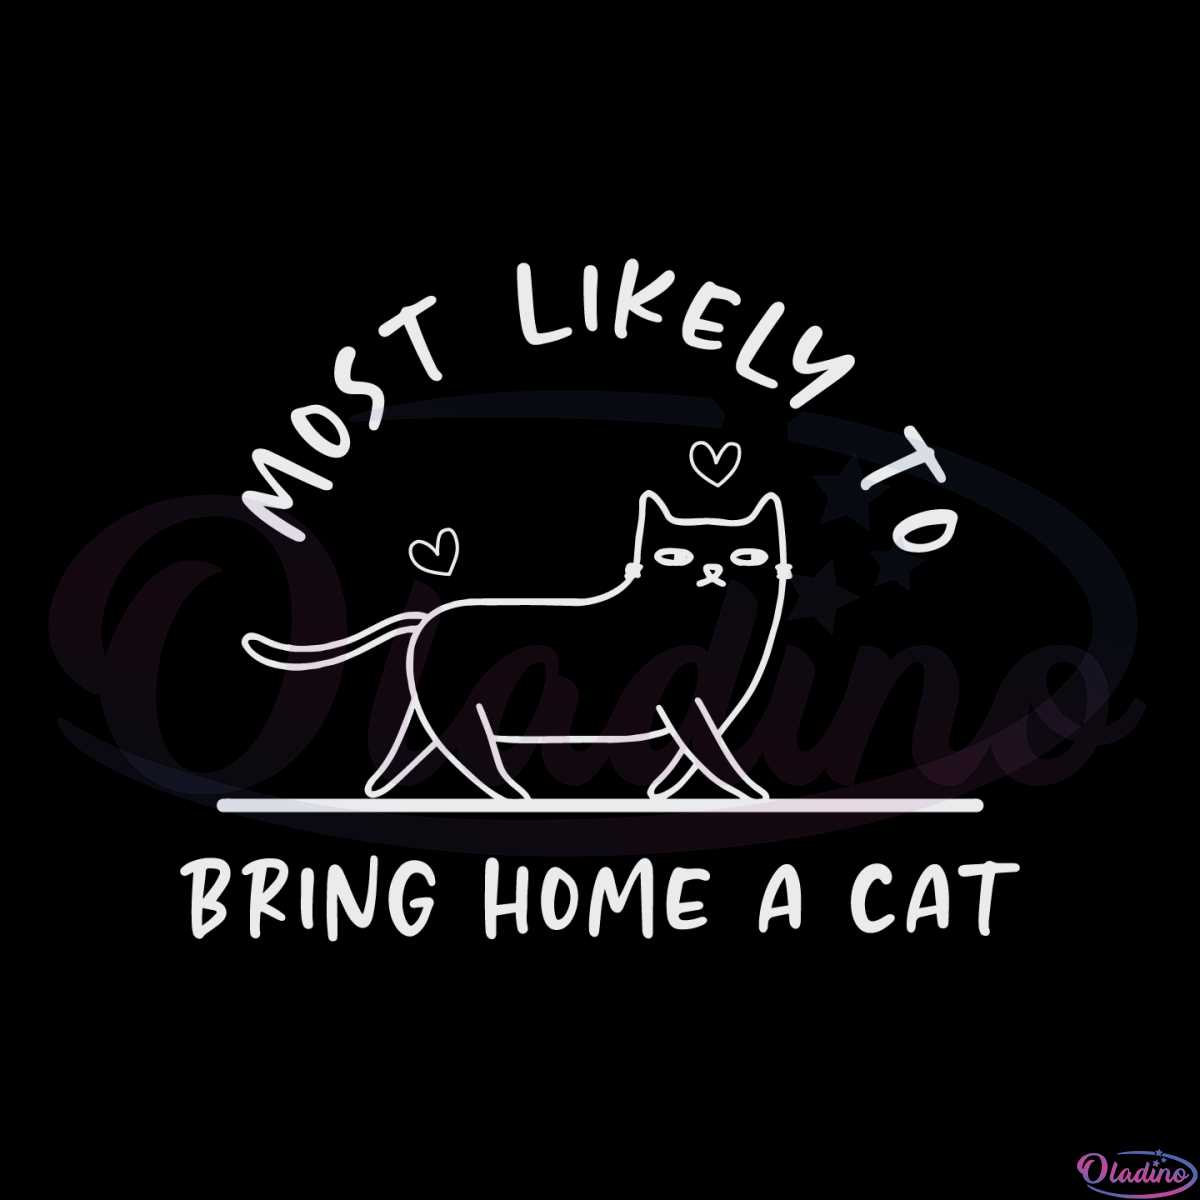 most-likely-to-bring-home-a-cat-svg-files-silhouette-diy-craft